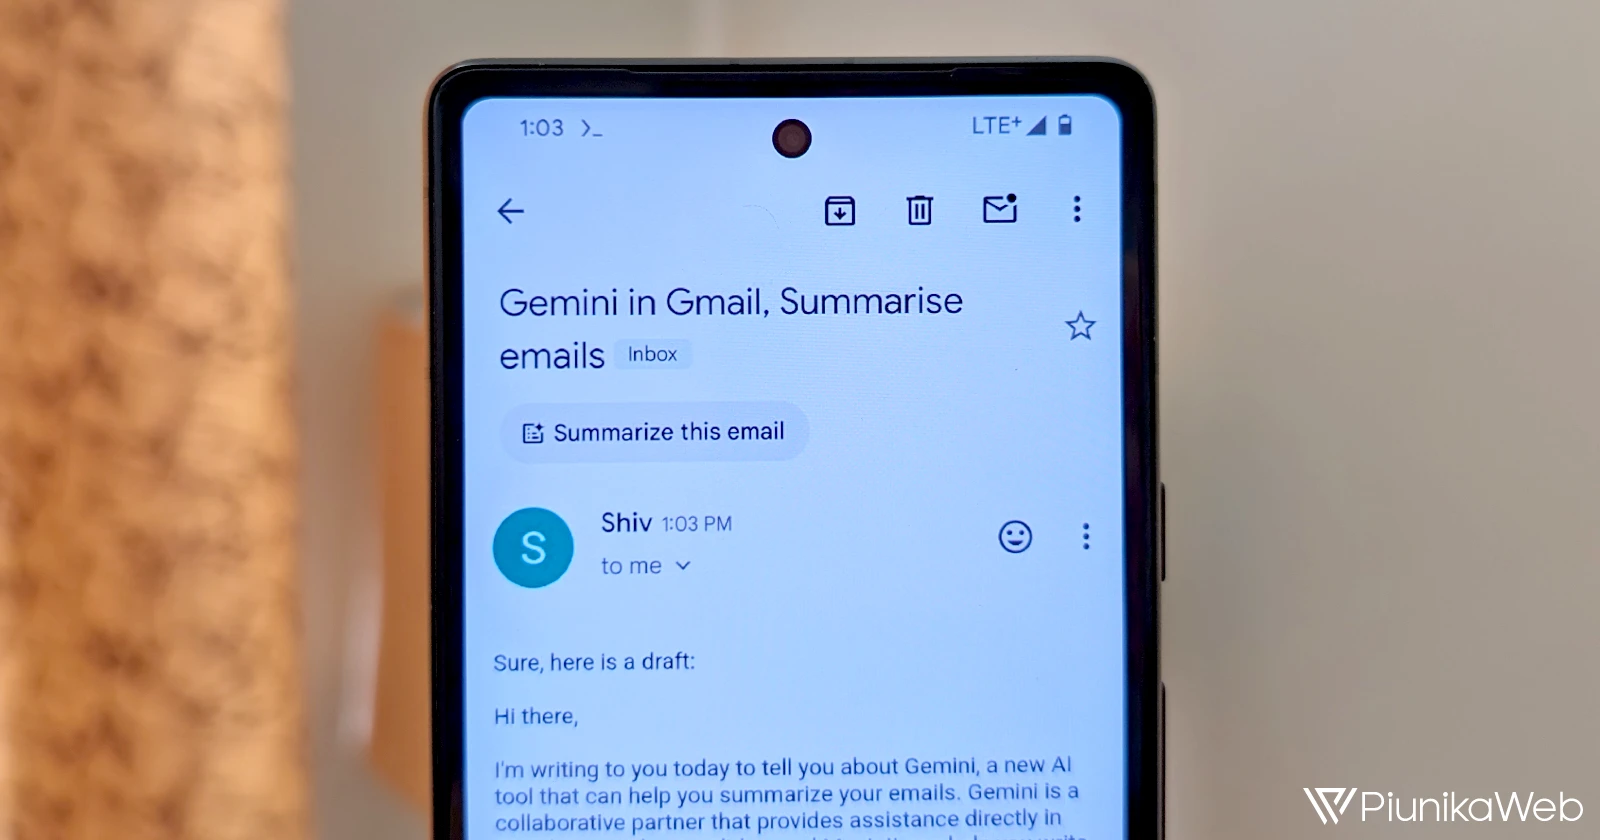 Gmail app readying 'Summarize this email' feature powered by Gemini AI on Android